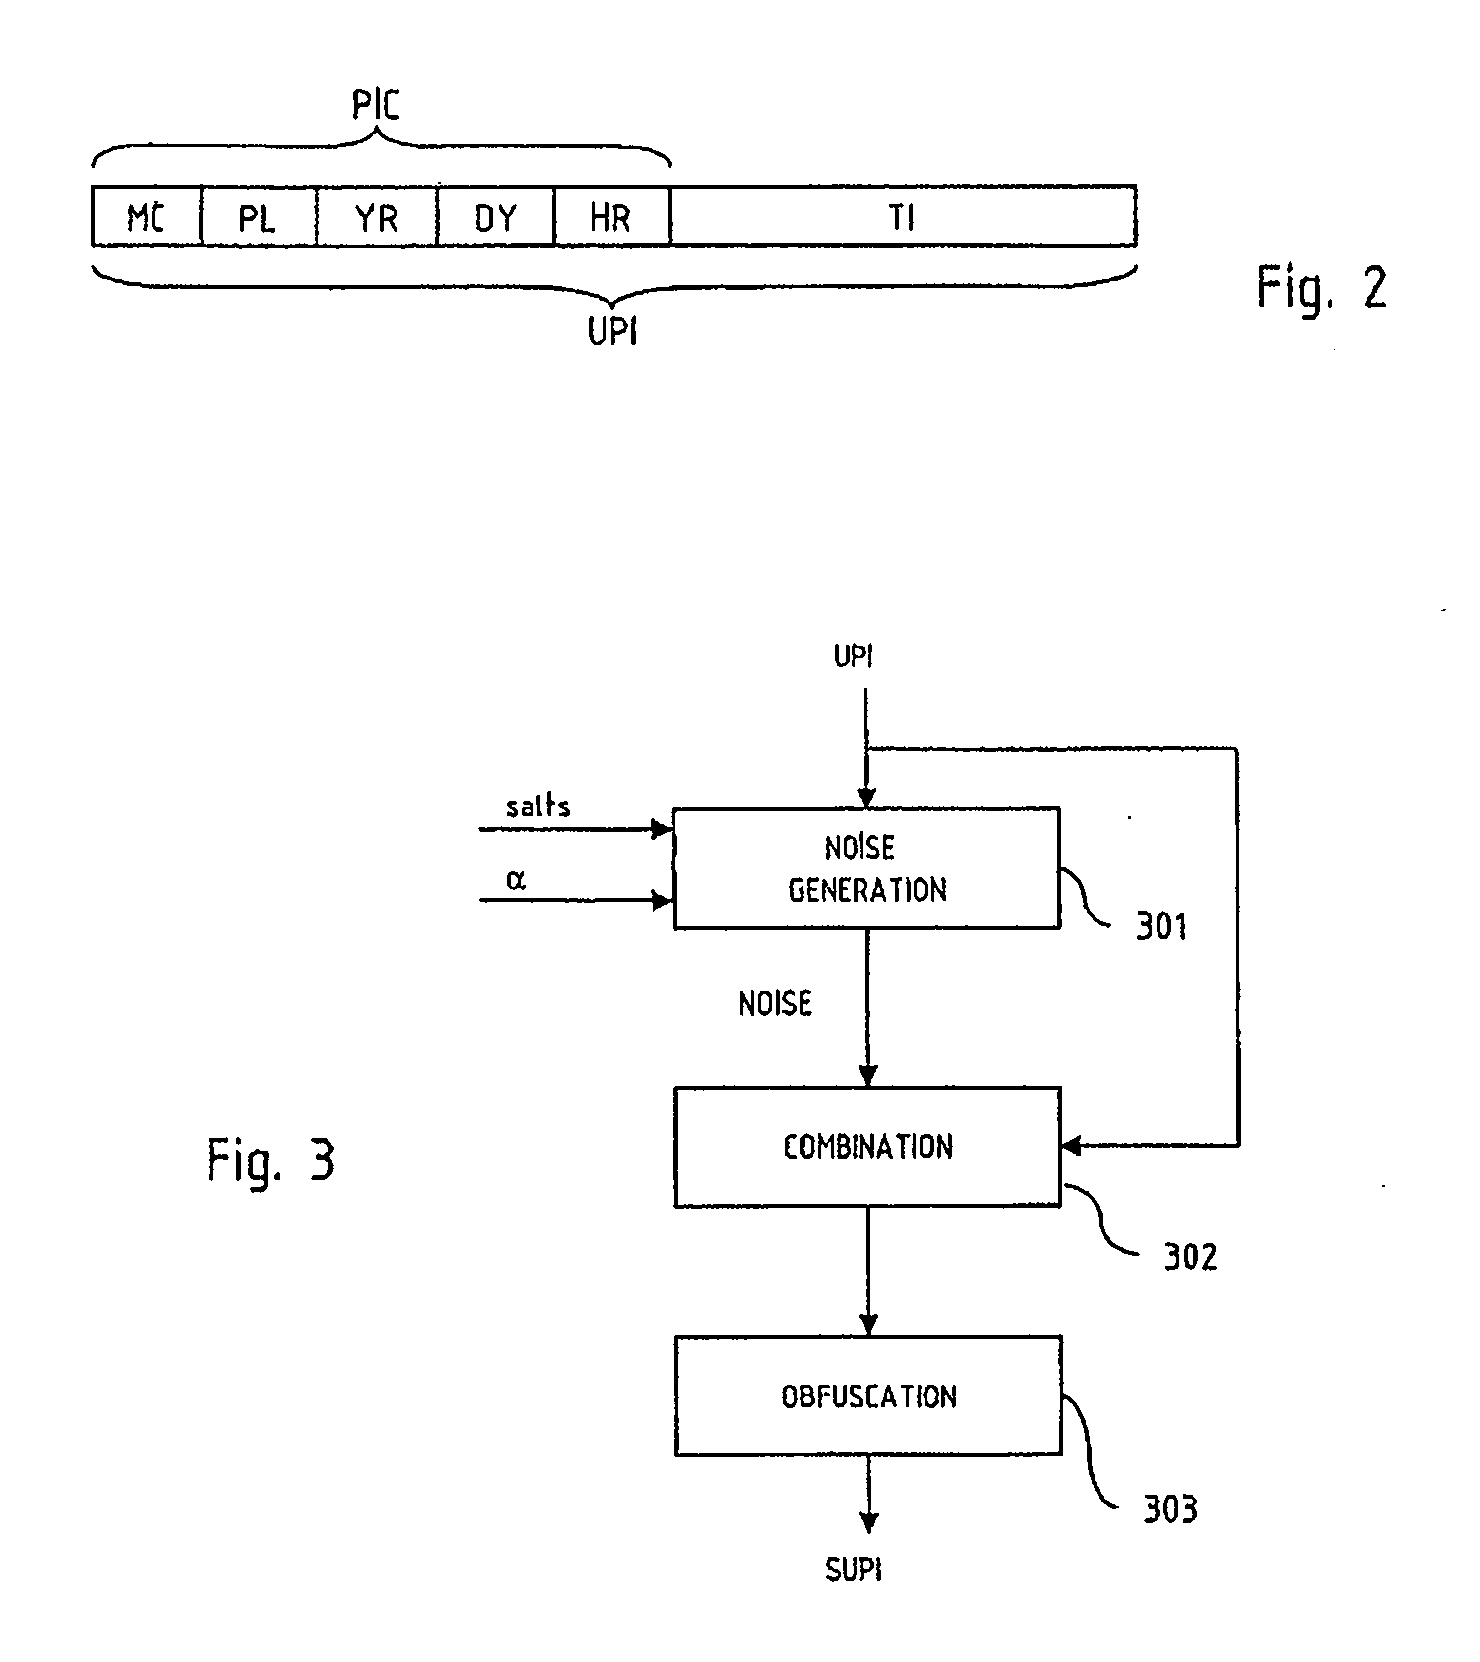 Methods and Systems for Making, Tracking and Authentication of Products